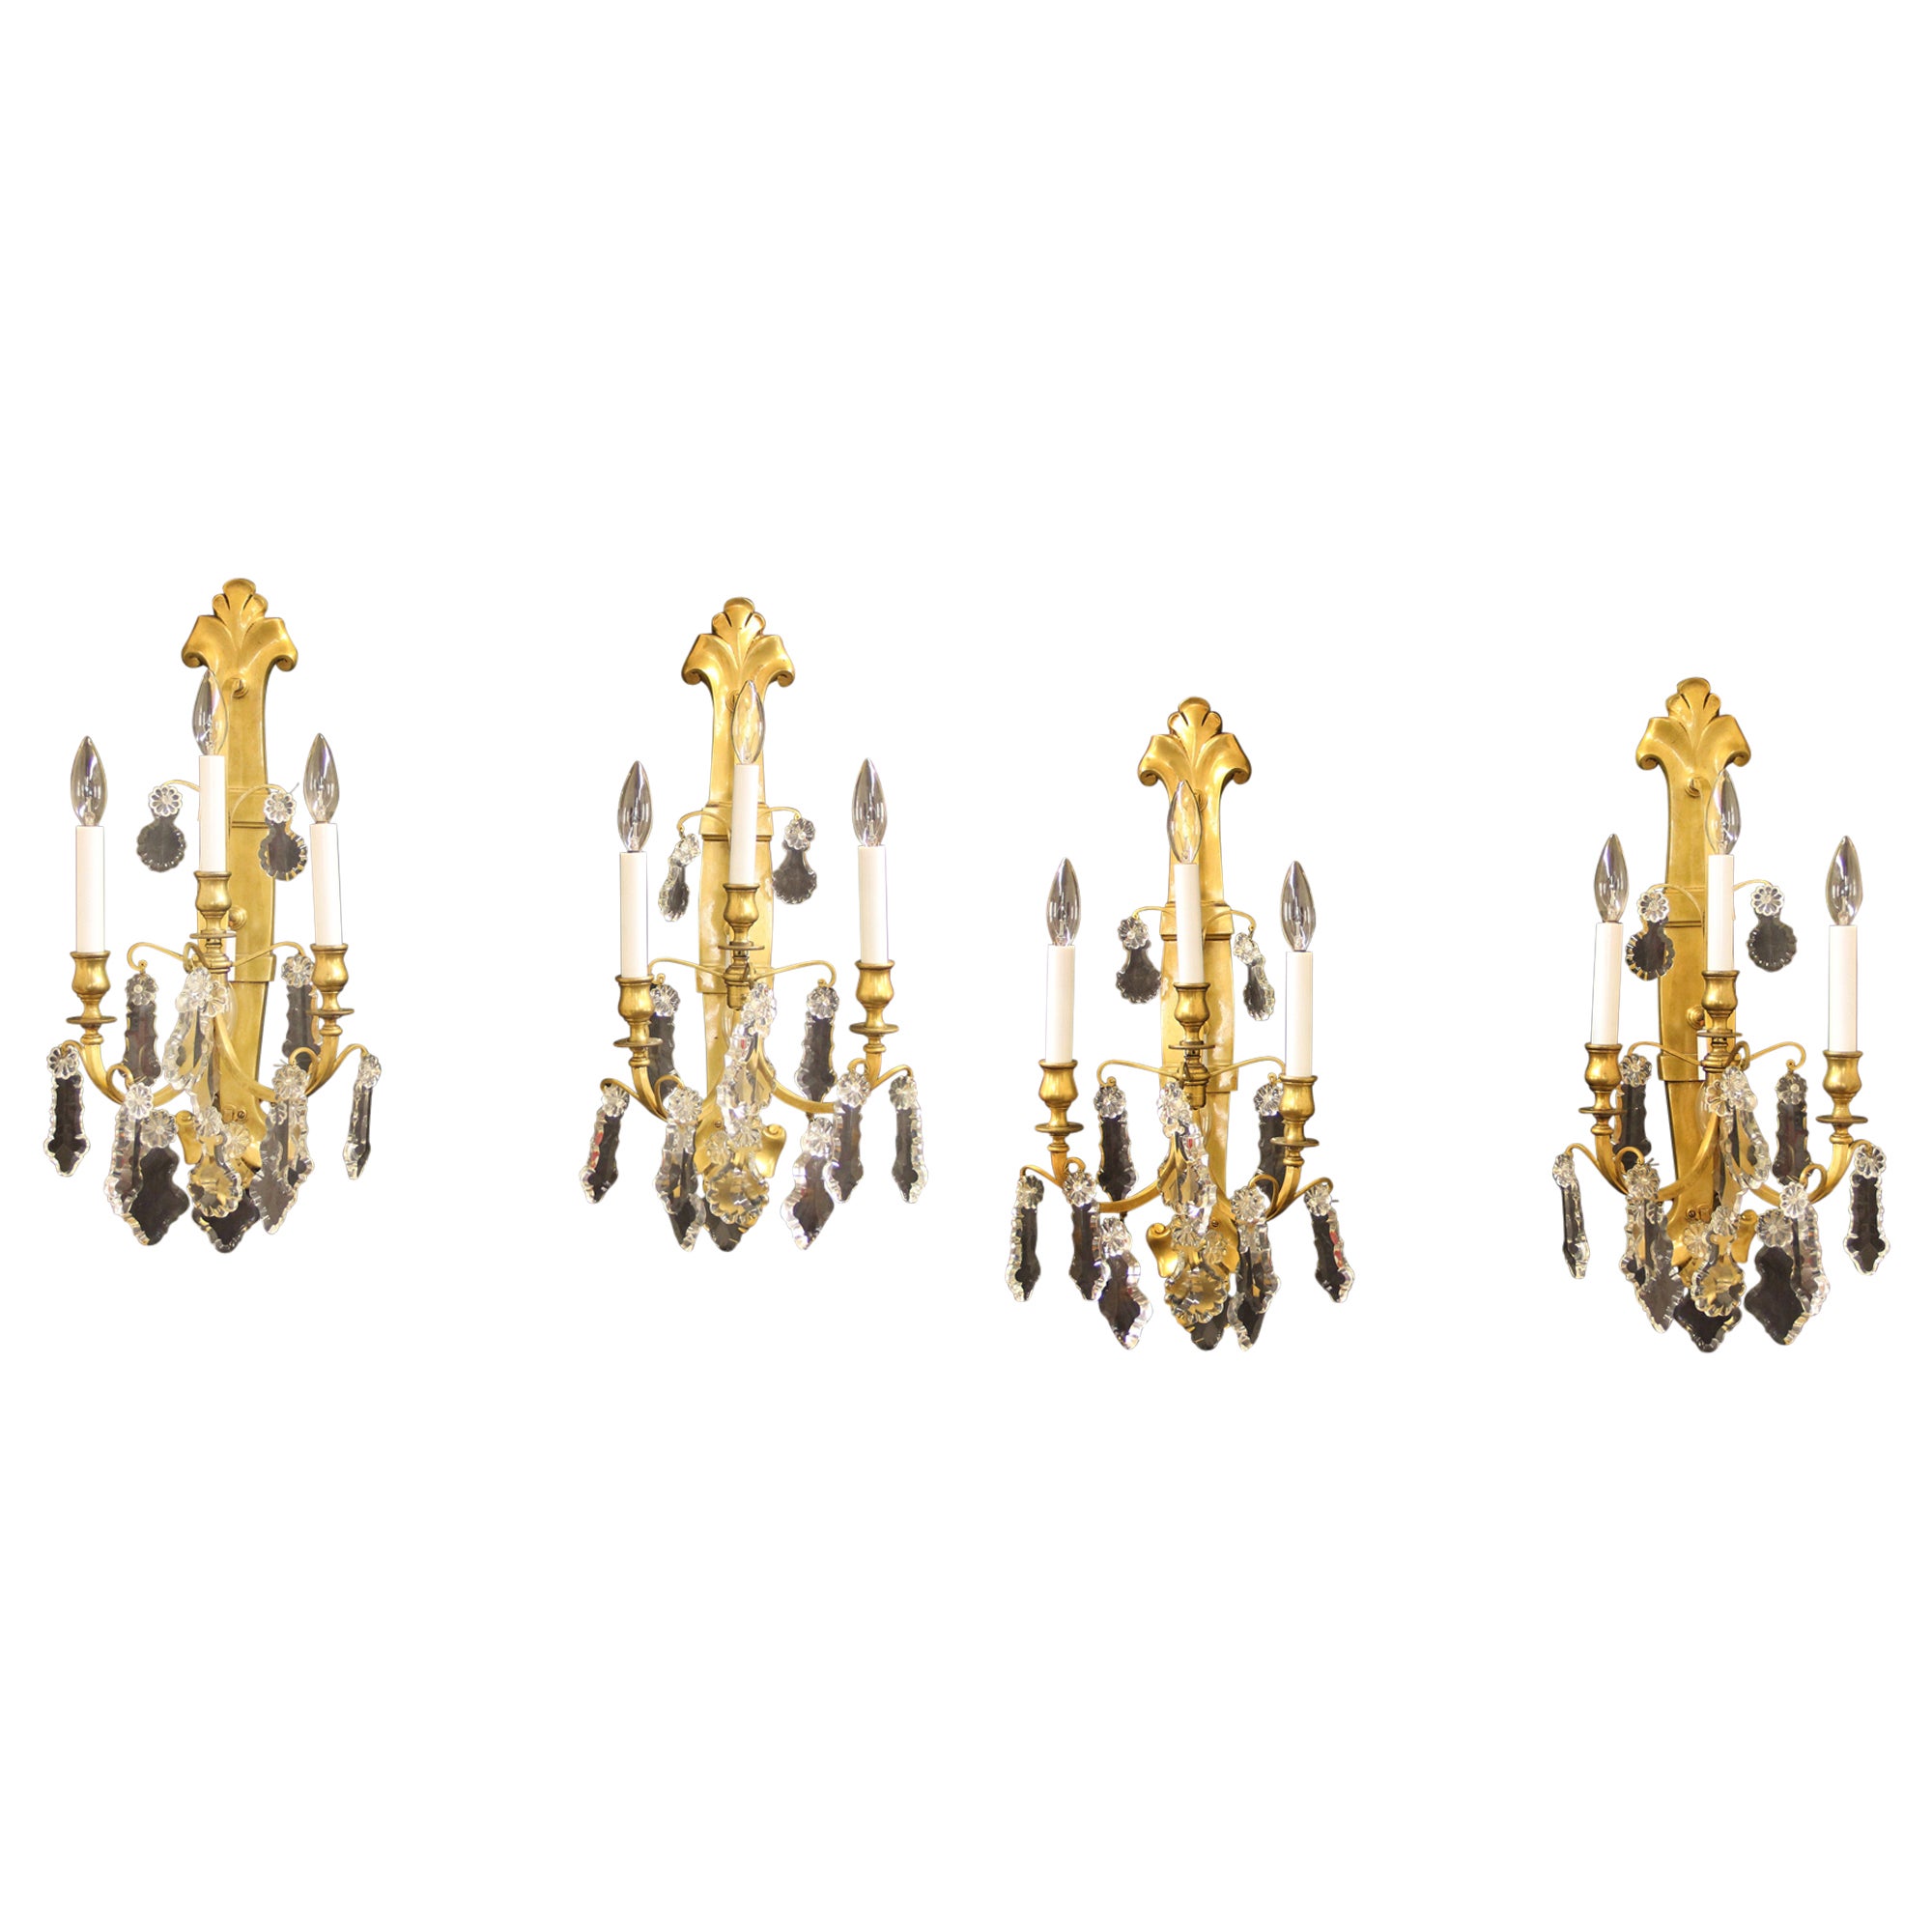 Set of Four Late 19th / Early 20th Century Gilt Bronze and Crystal Sconces